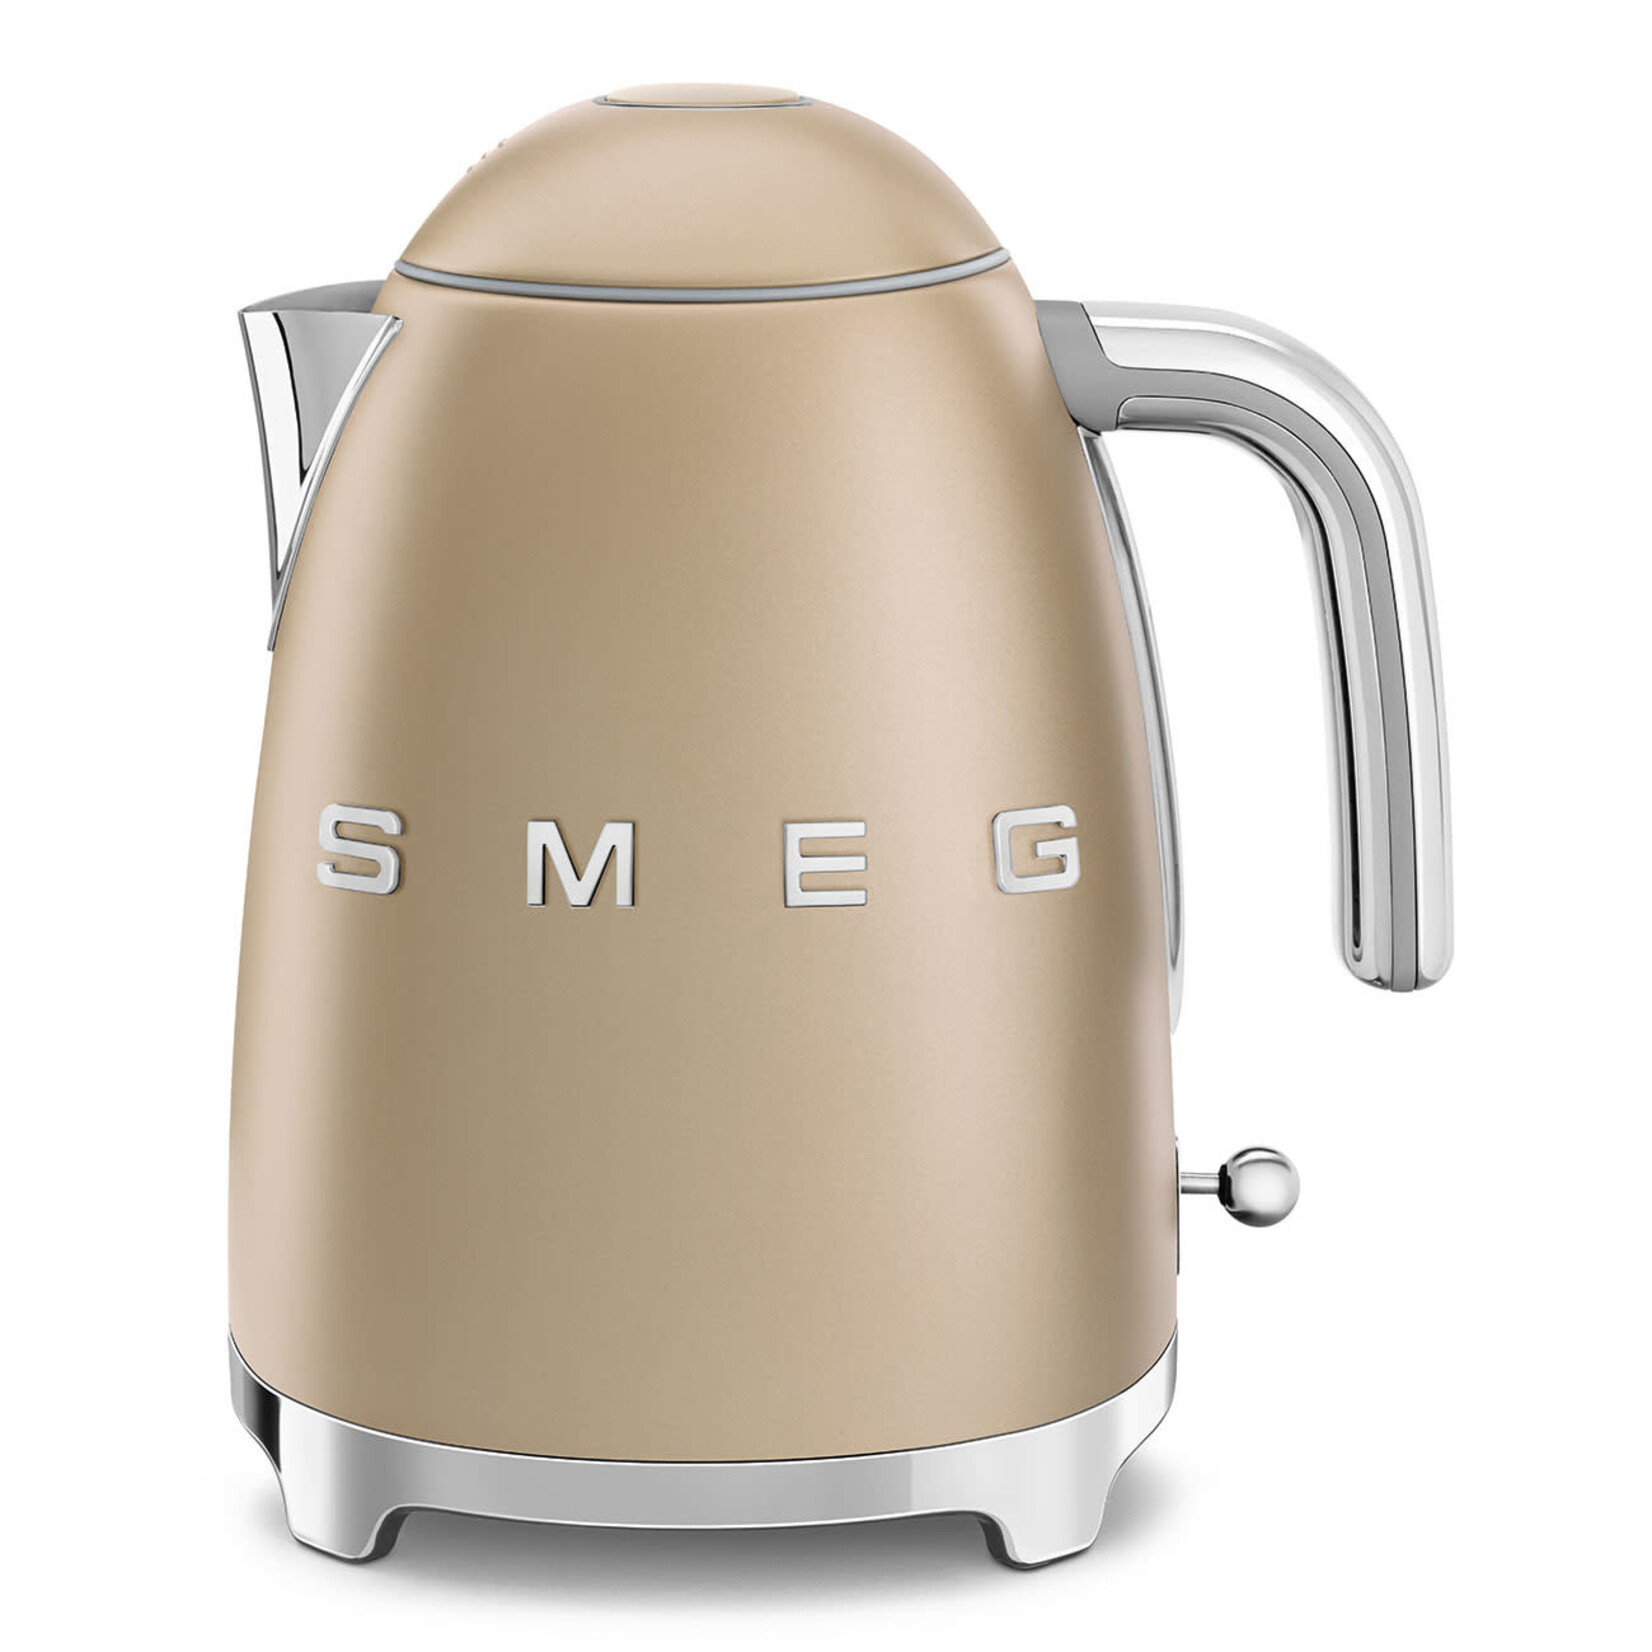 SMEG 7 CUP Kettle (Pink)